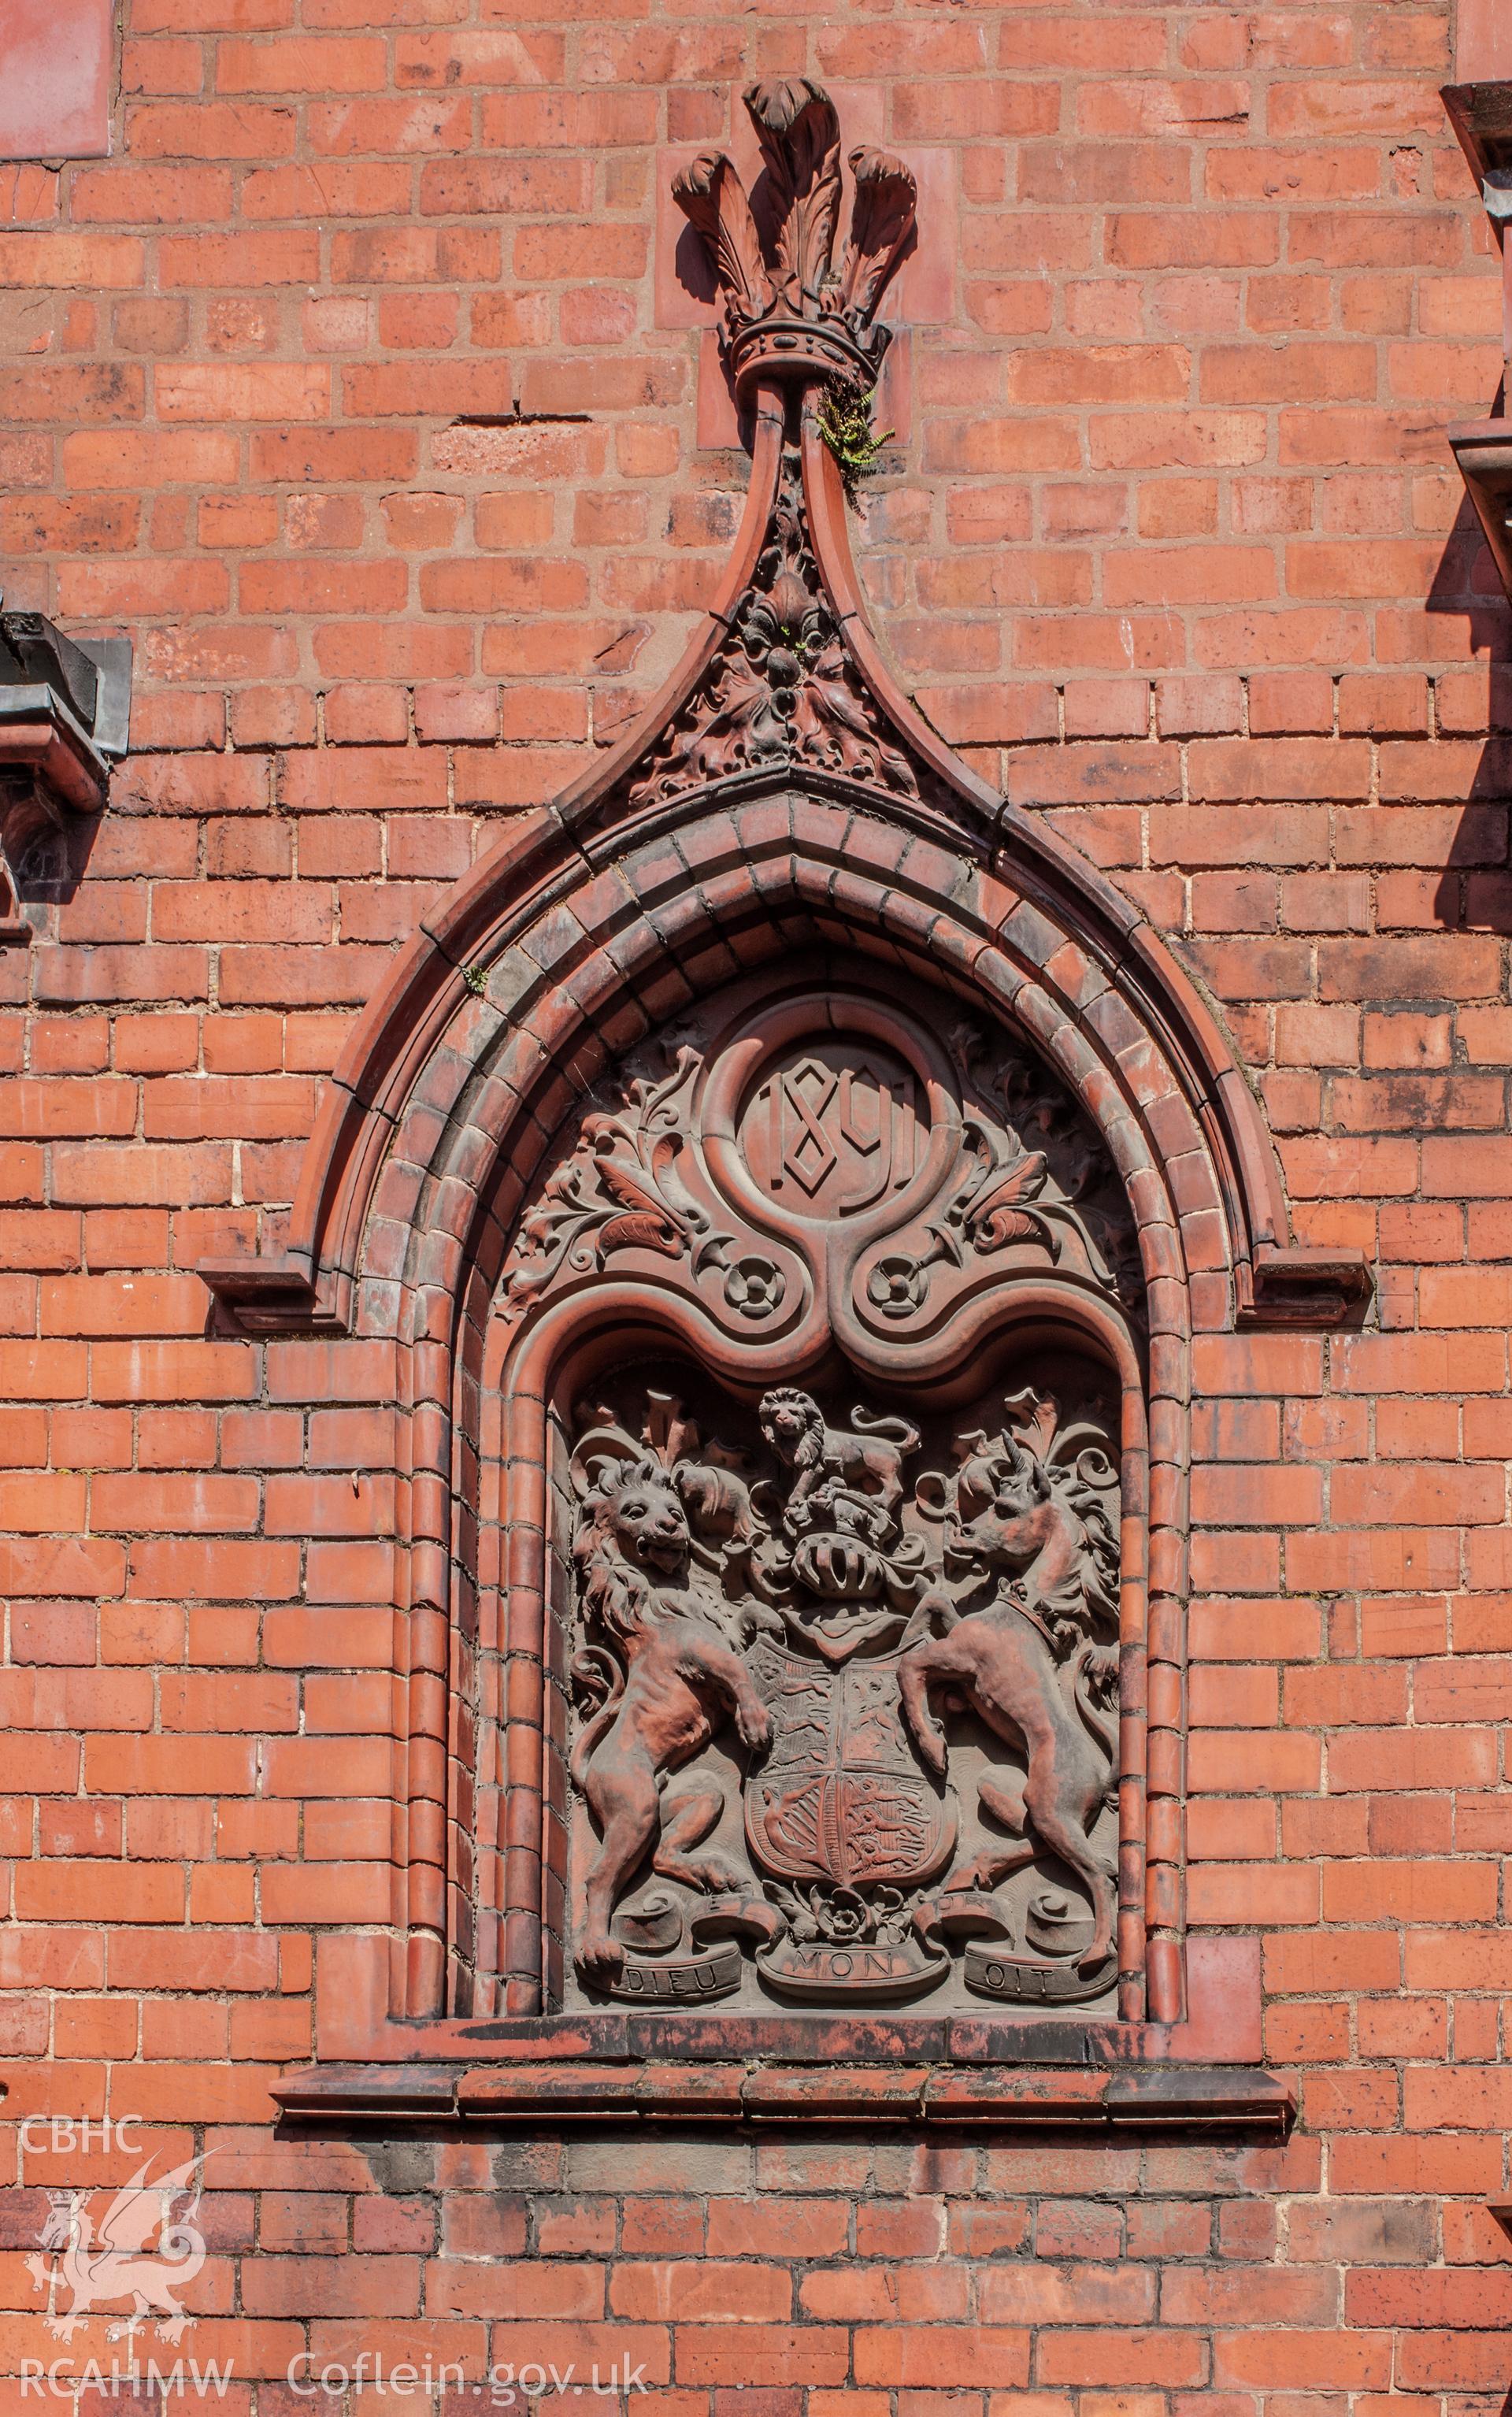 Decorative plaque on the southeast wall.